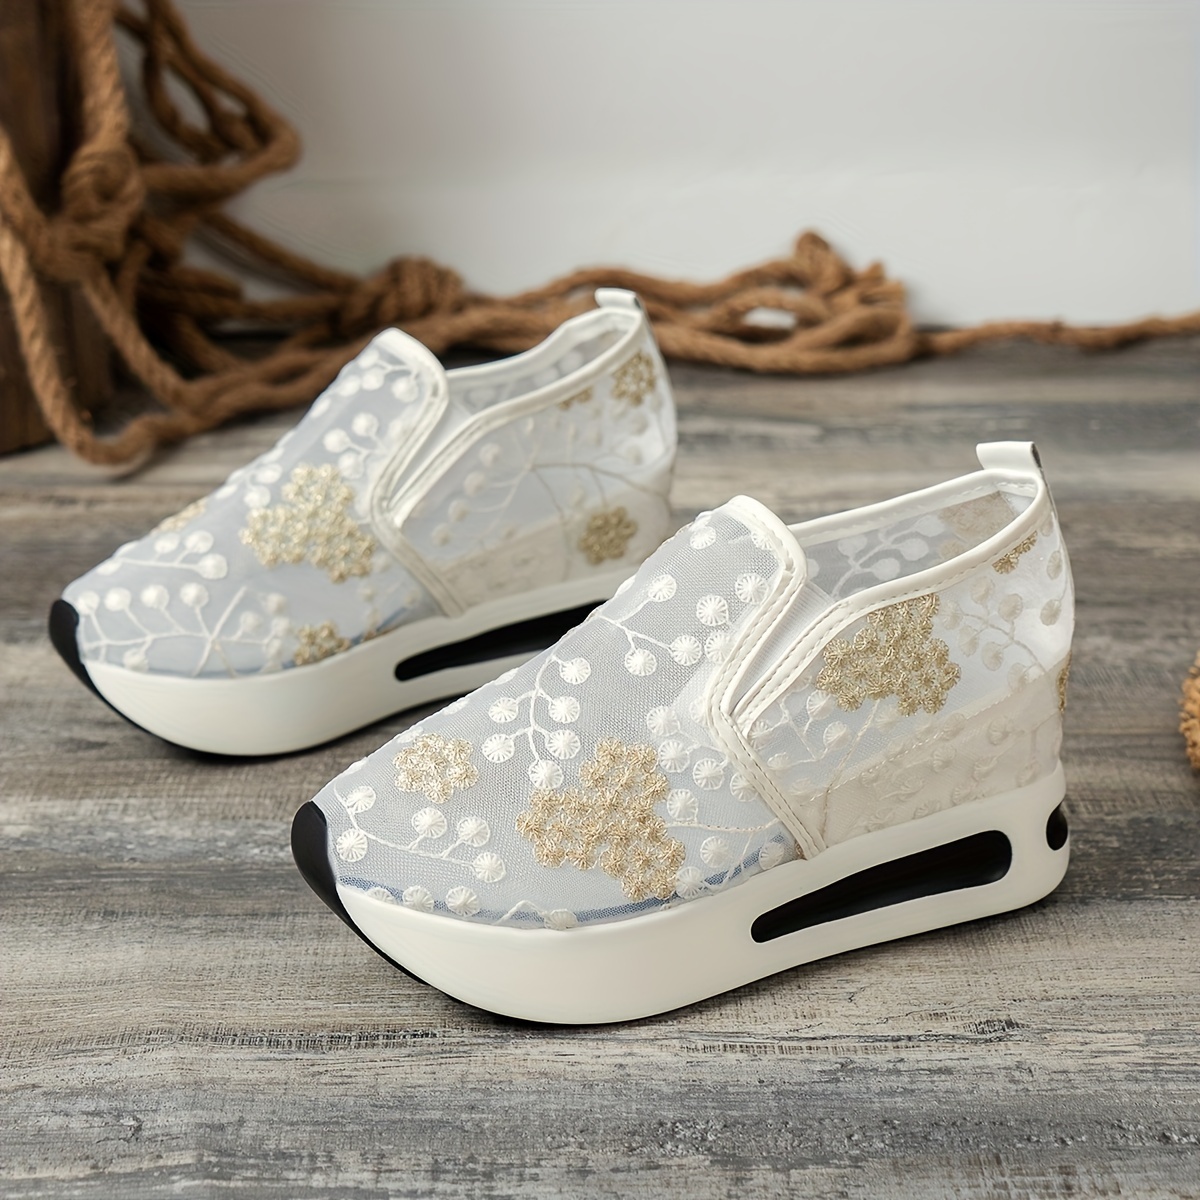  Sudnghyto Platform Sneakers for Women Floral Lace